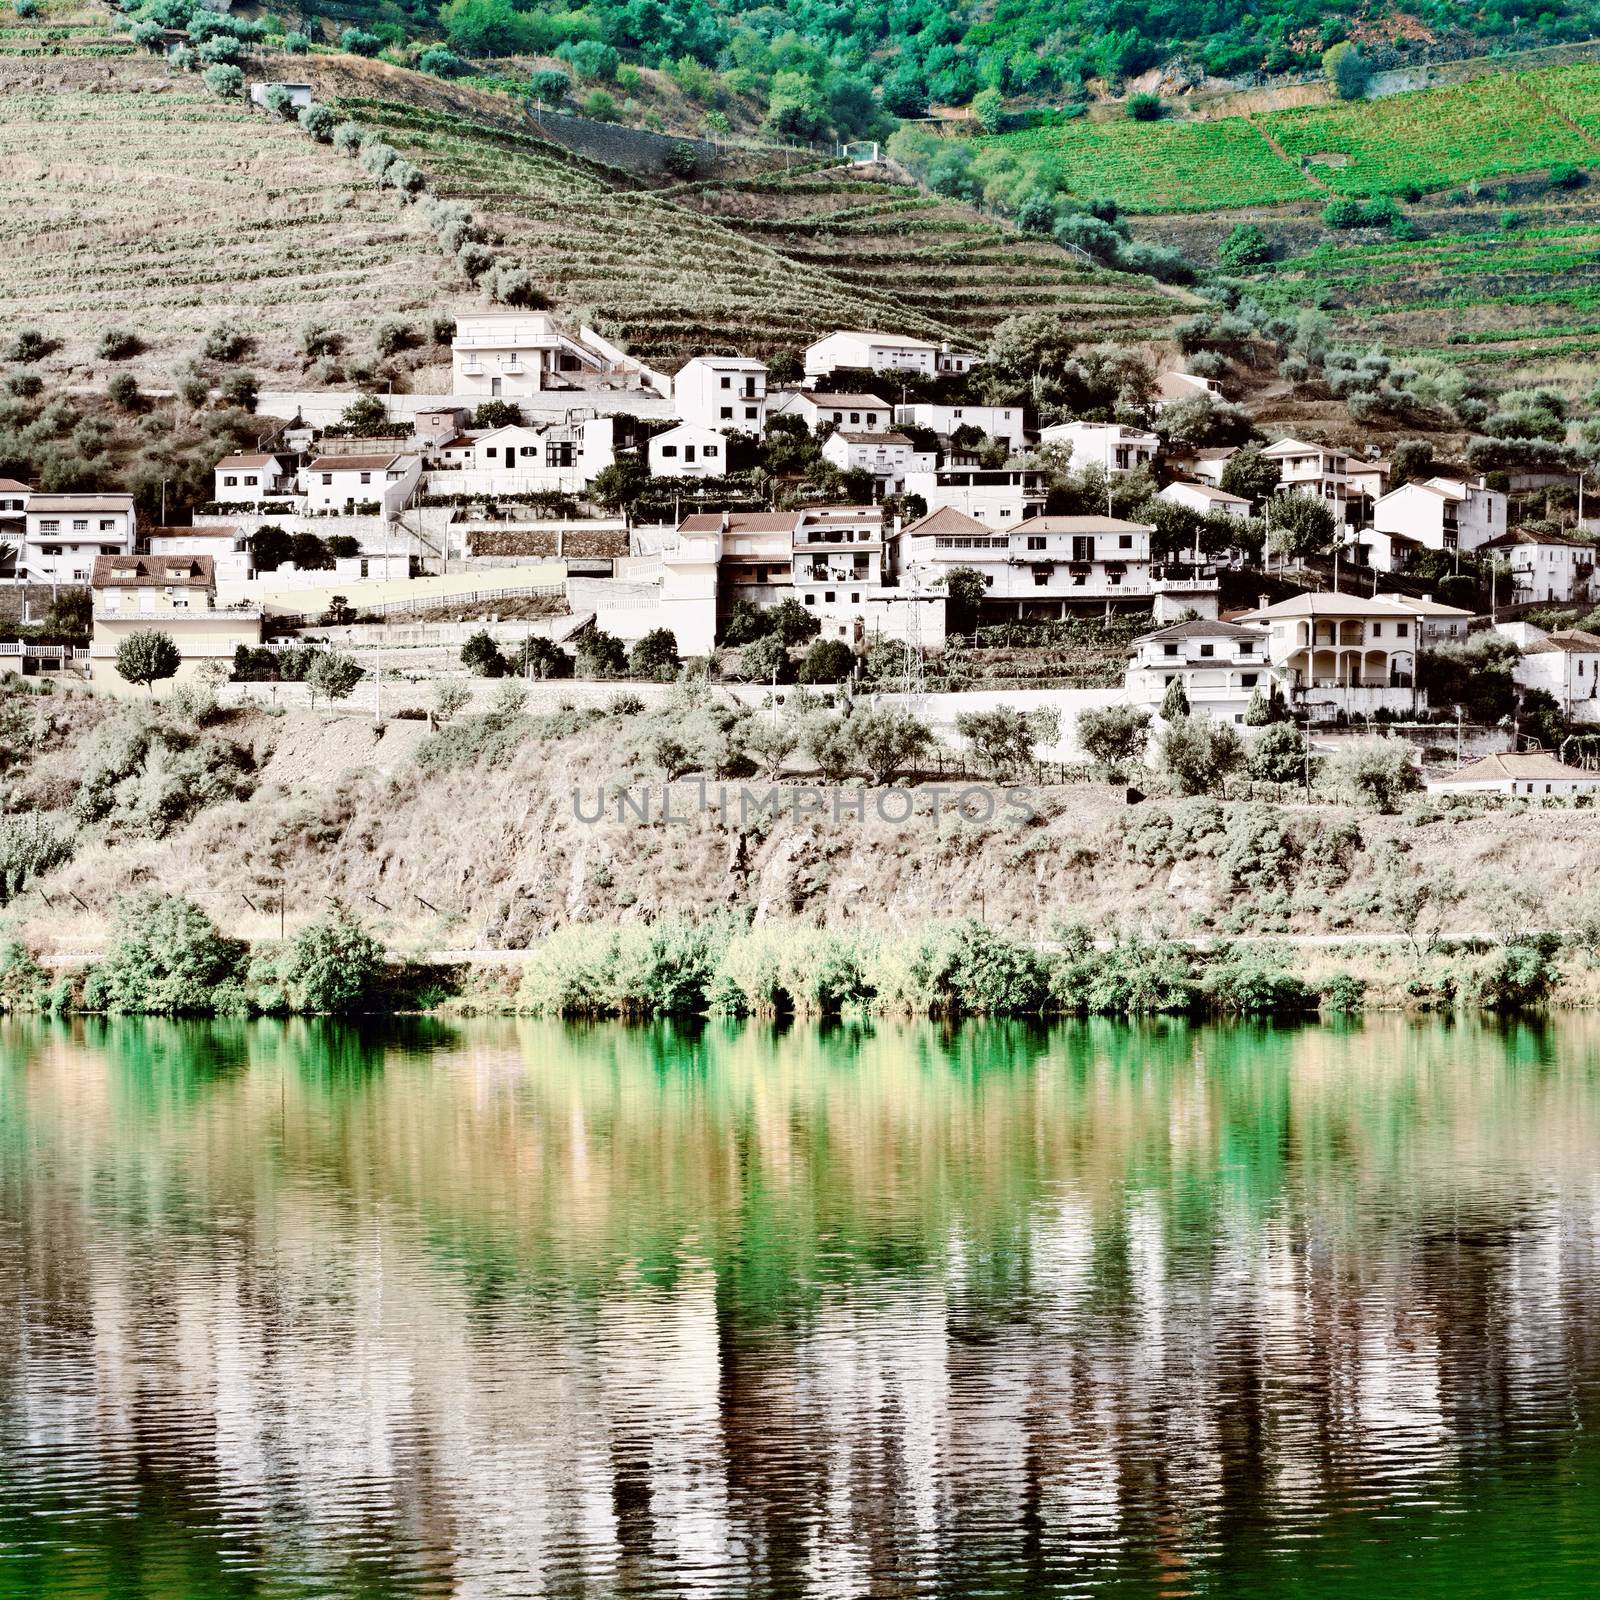 Vineyards in the Valley of the River Douro, Portugal, Vintage Style Toned Picture